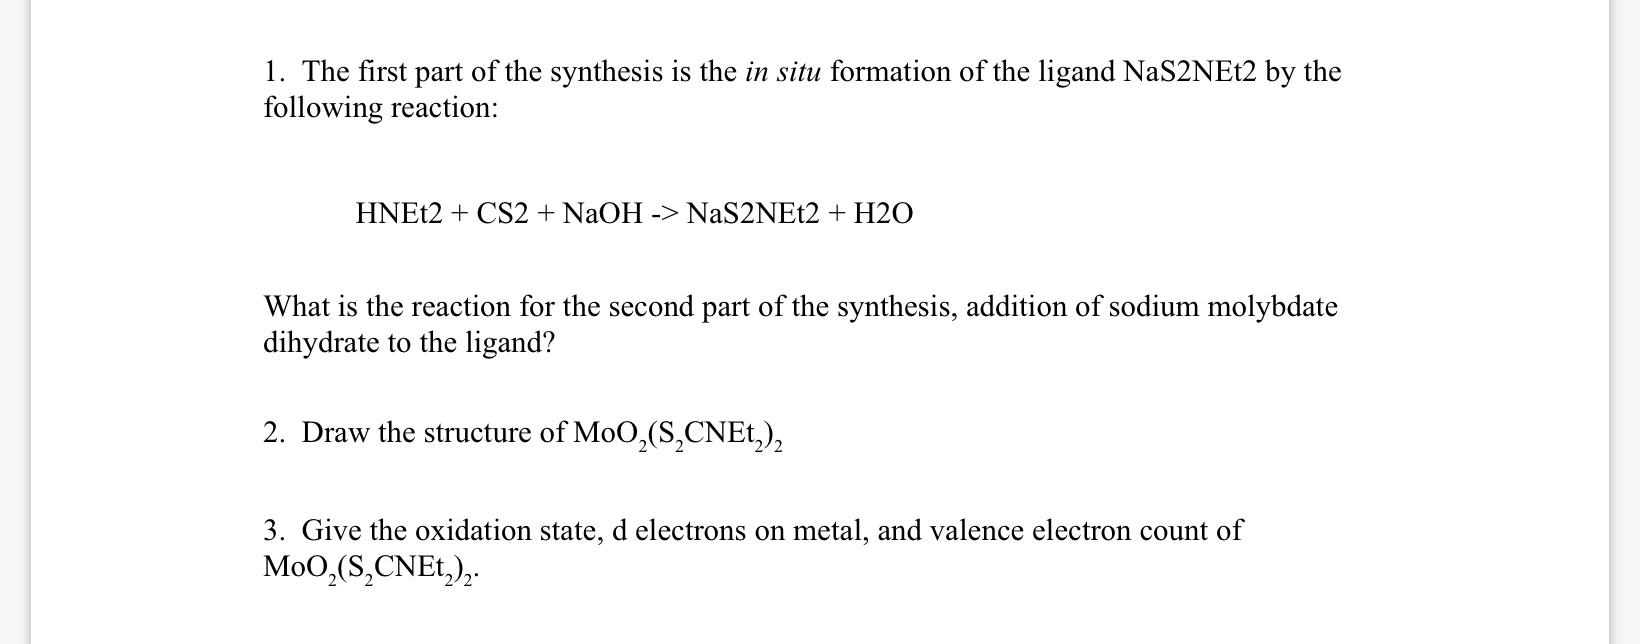 1. The first part of the synthesis is the in situ formation of the ligand NaS2NEt2 by the following reaction:
\[
\mathrm{HNEt